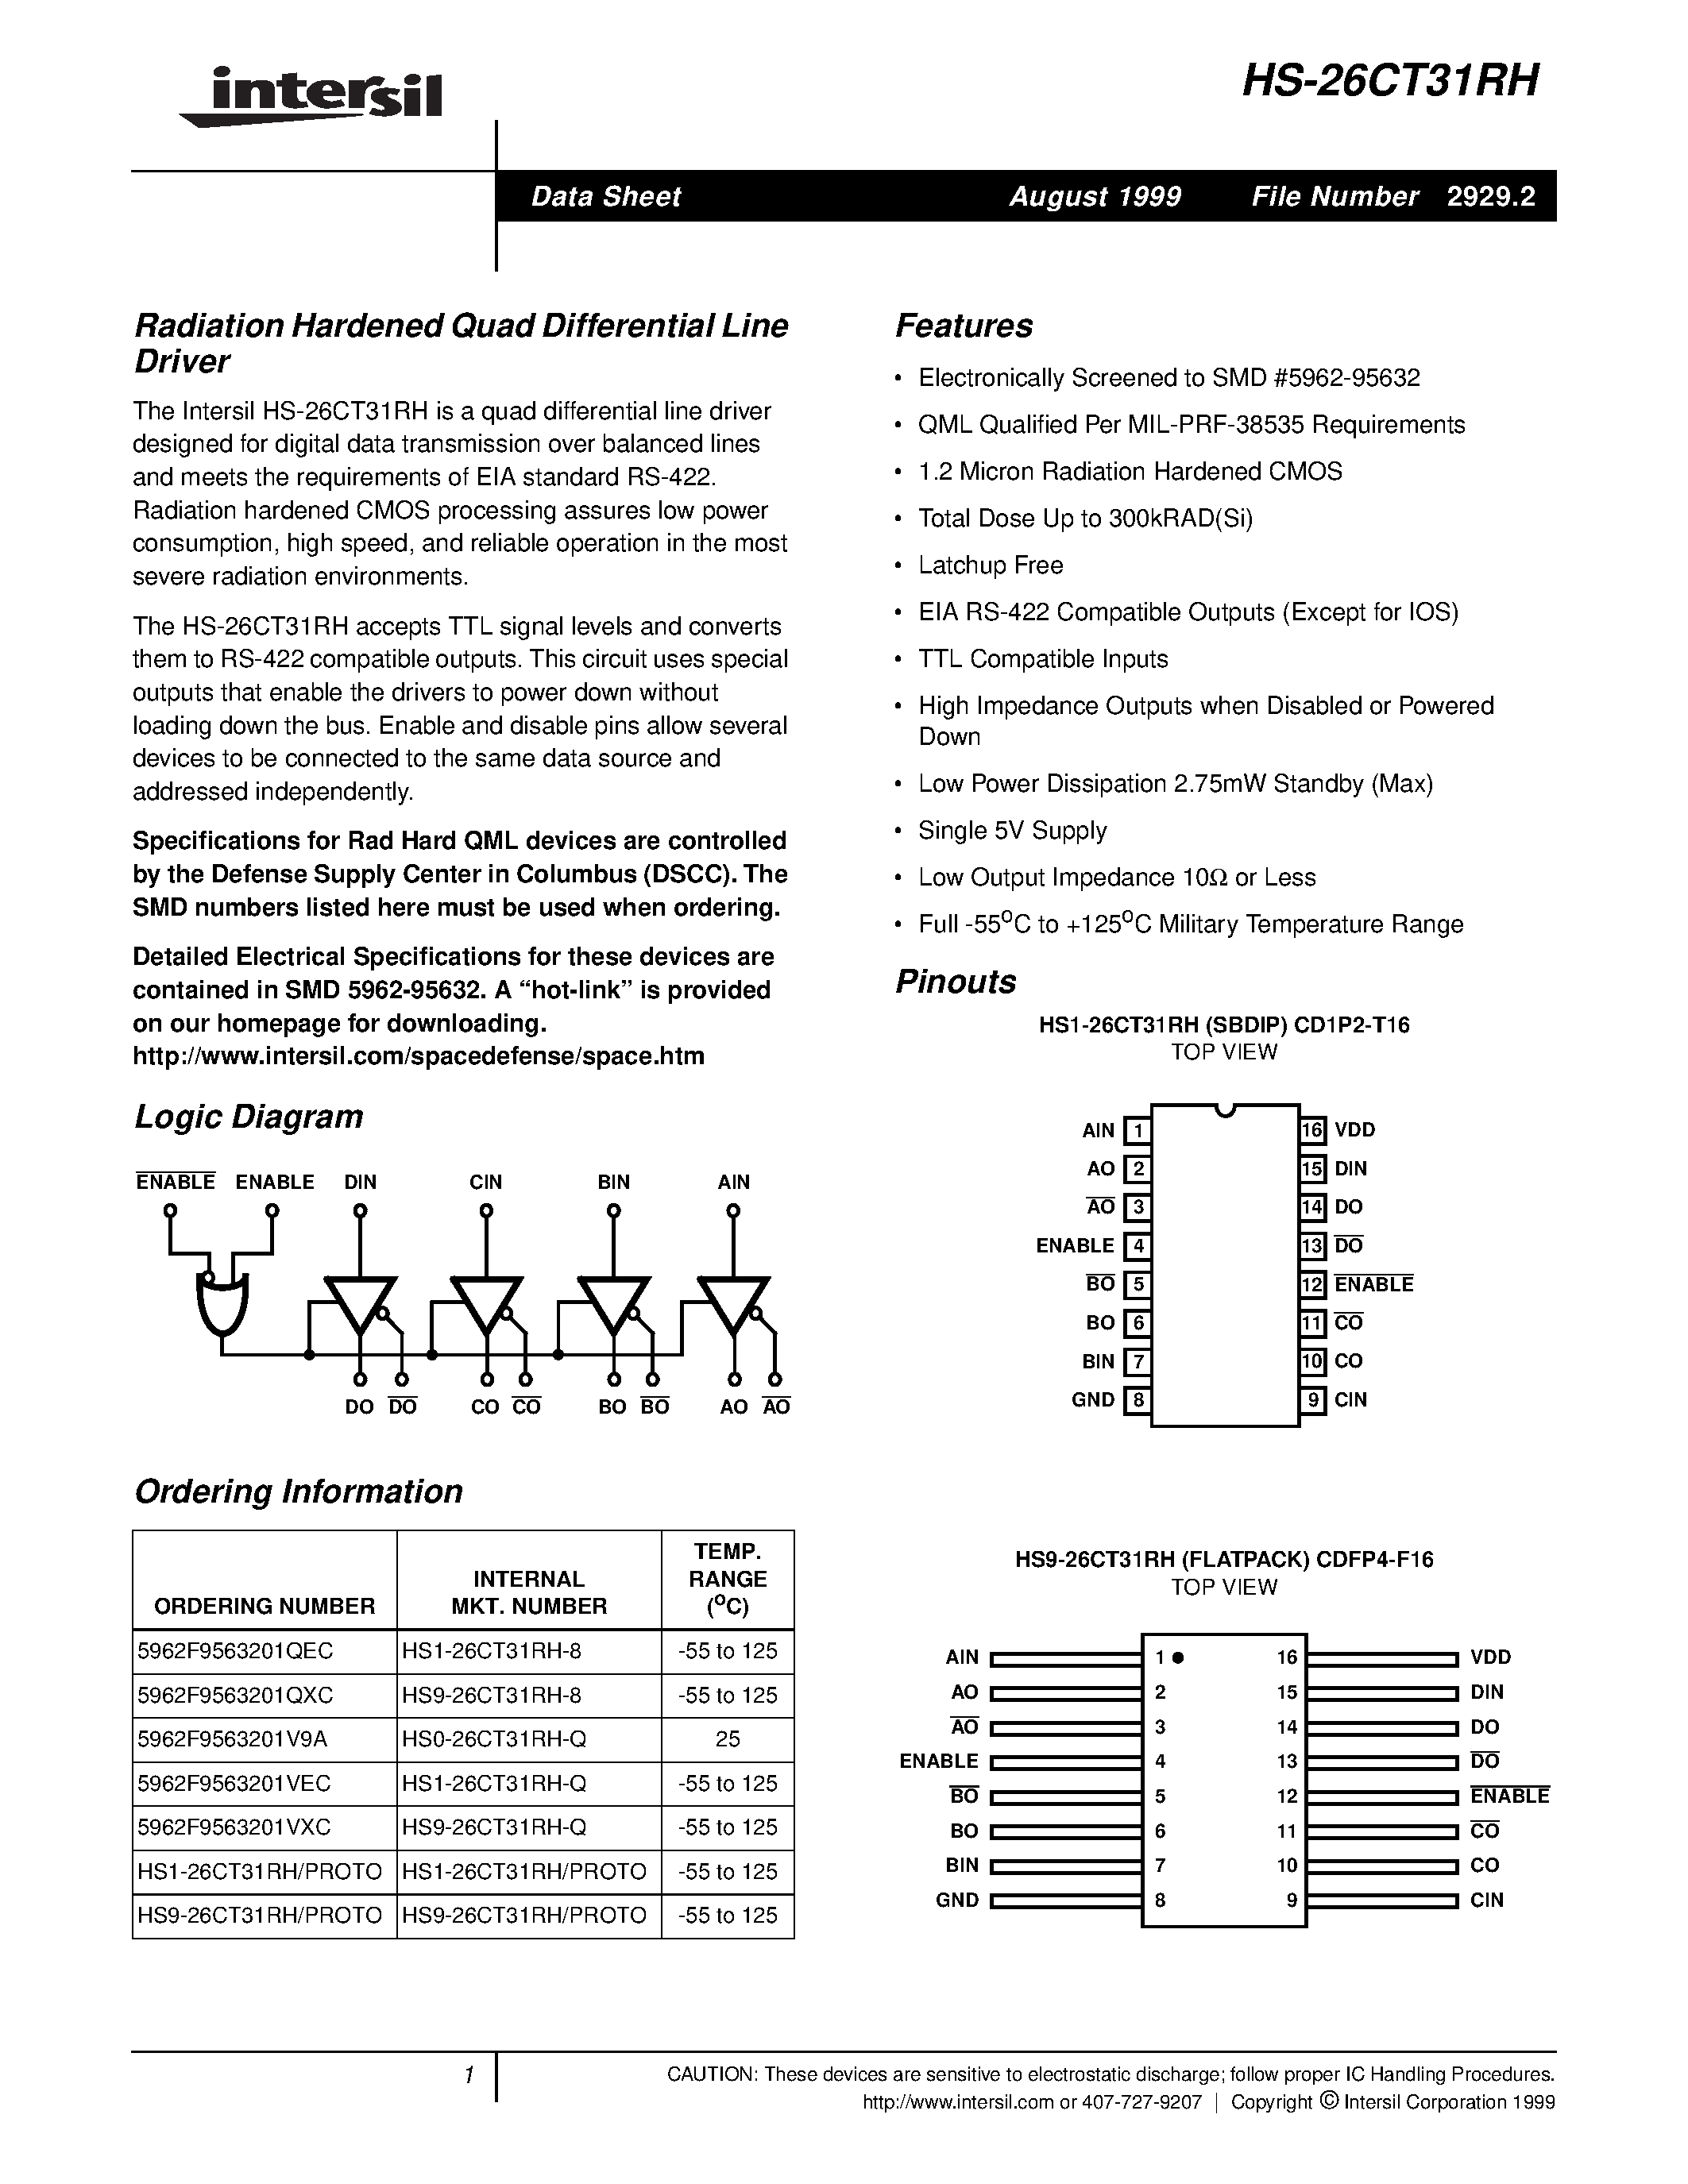 Datasheet HS9-26CT31RH-Q - Radiation Hardened Quad Differential Line Driver page 1